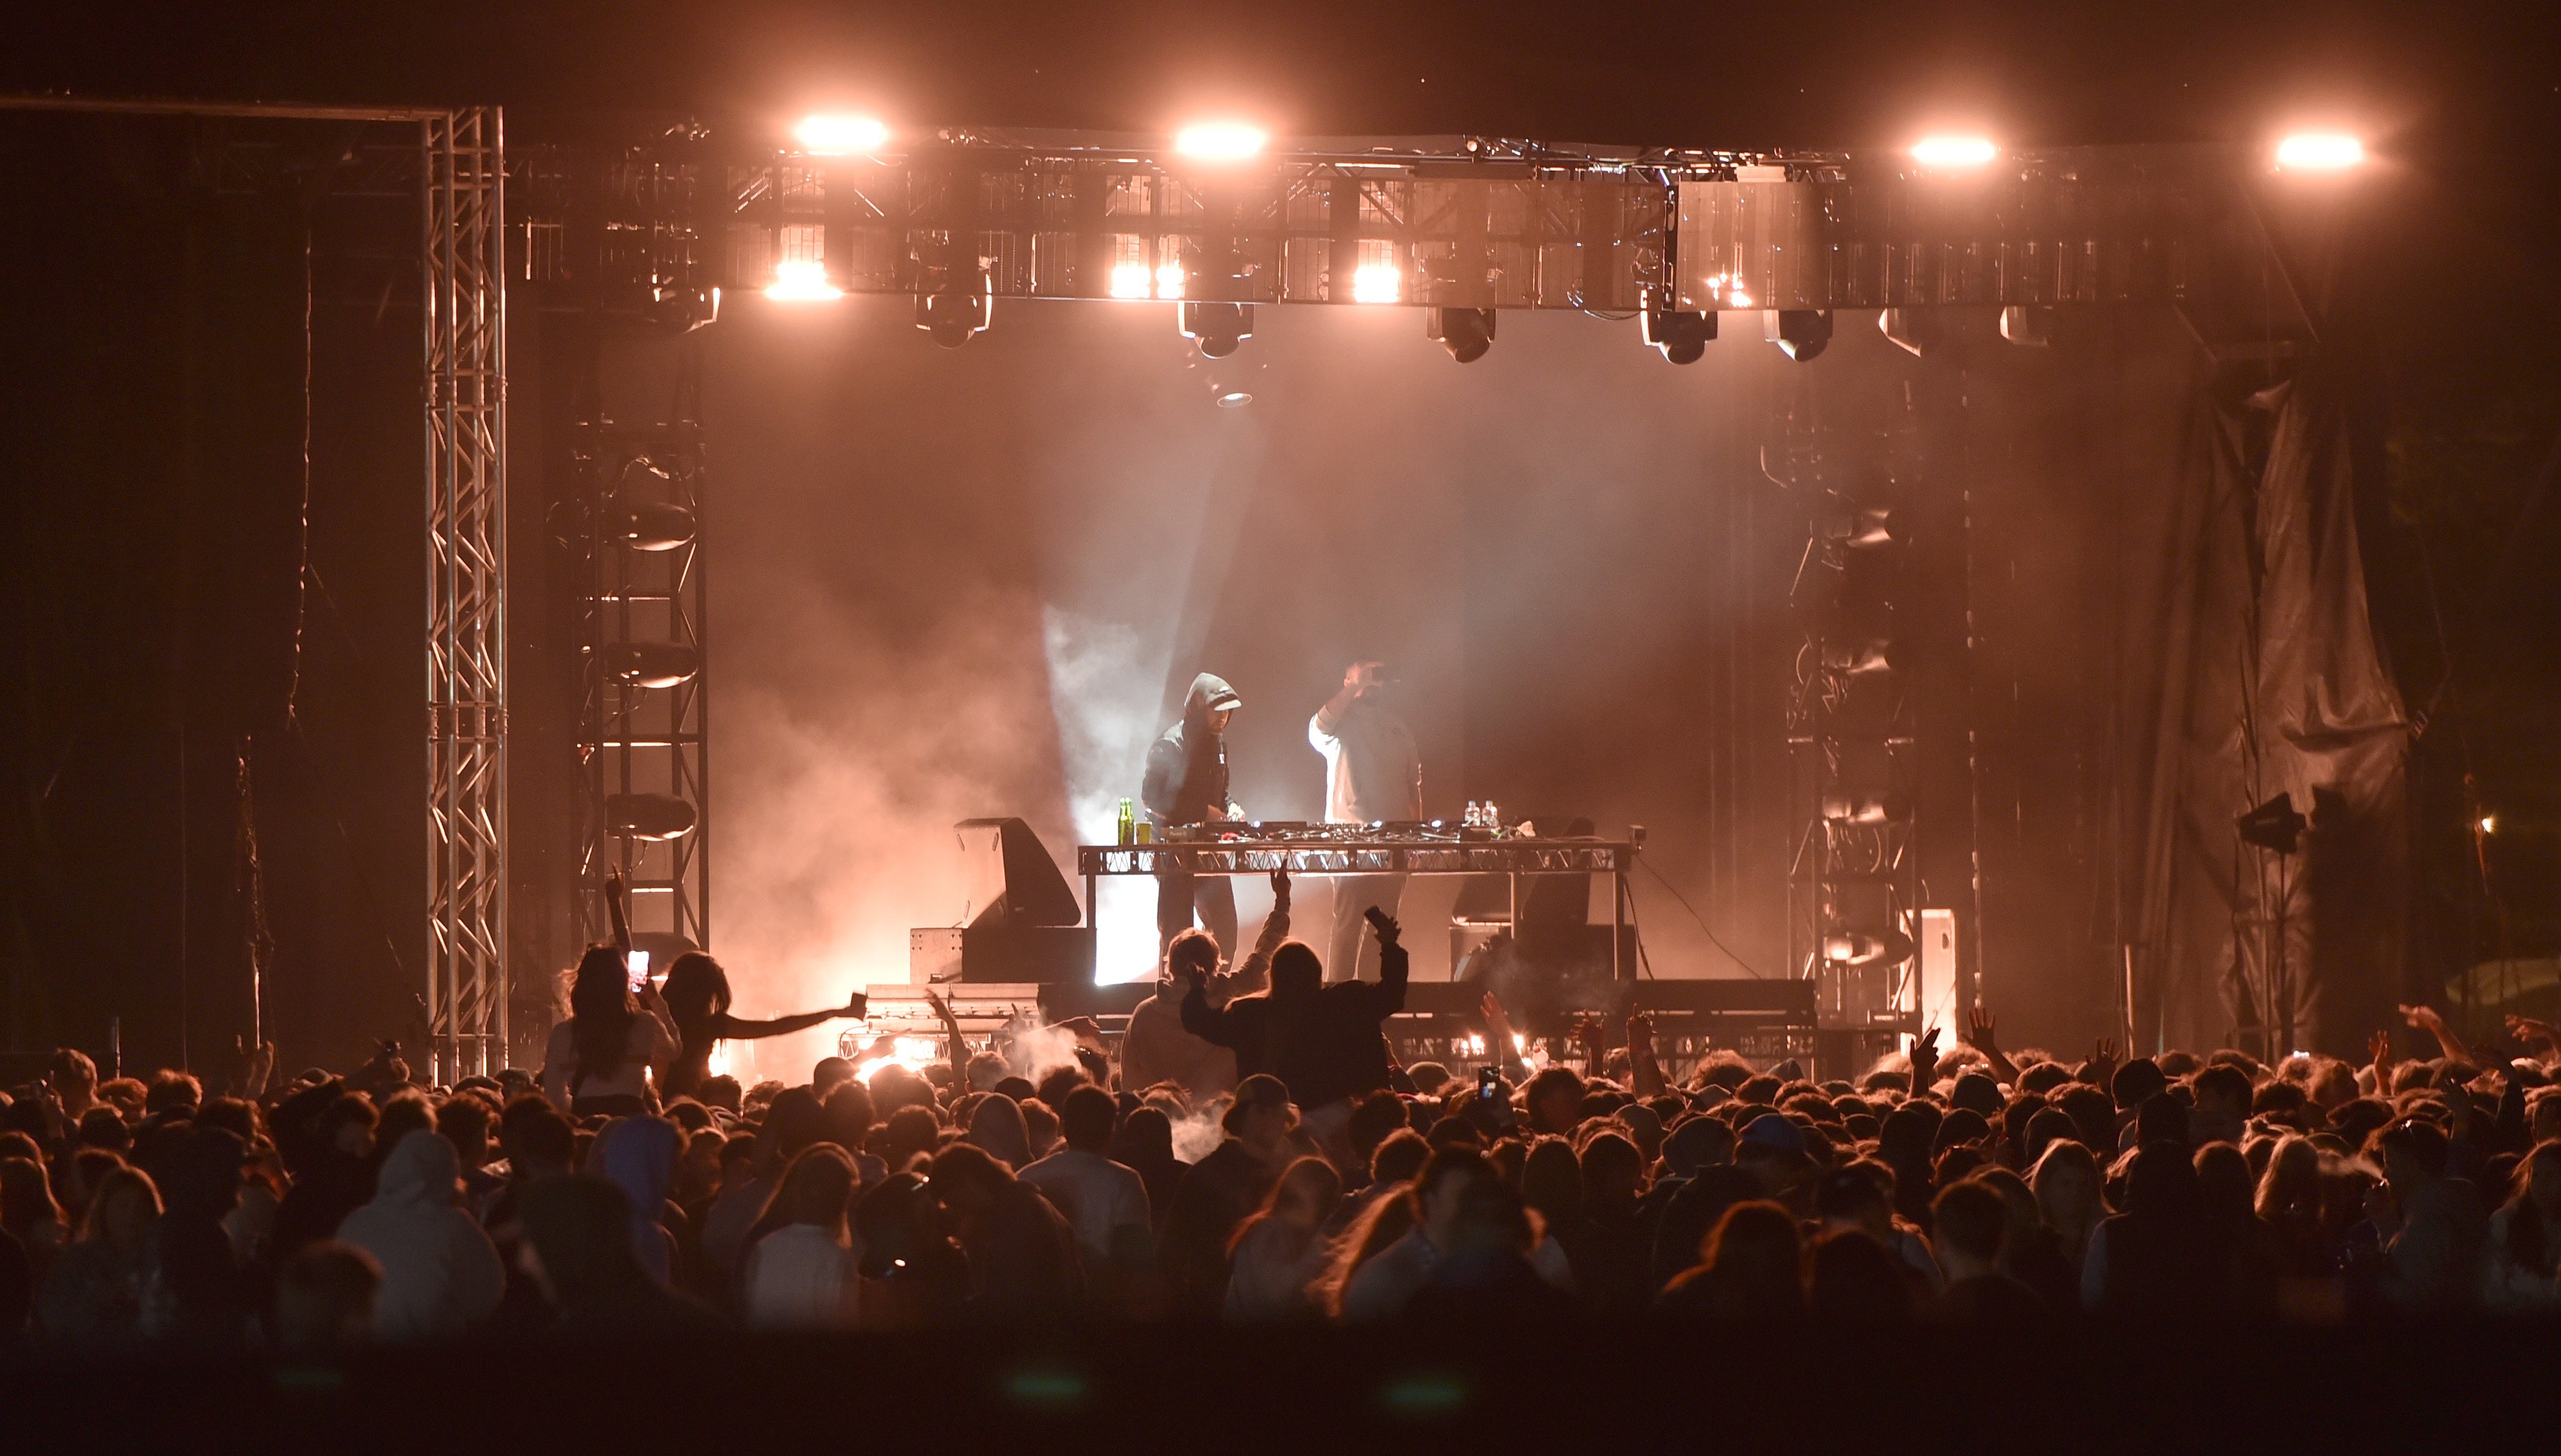 Drum and bass festival not everyone's jam | Otago Daily Times Online News